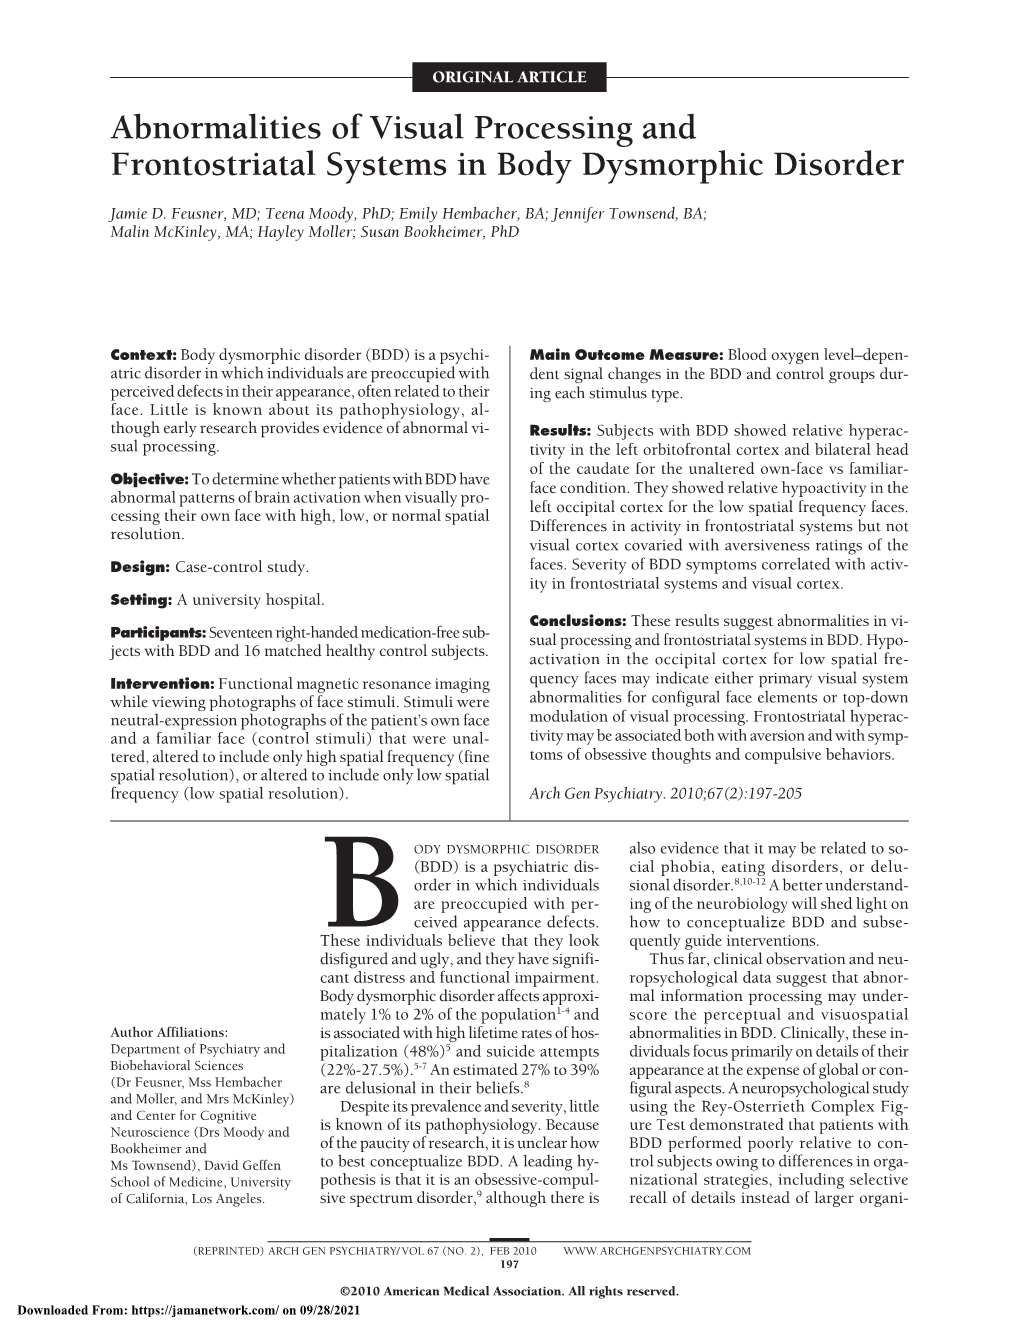 Abnormalities of Visual Processing and Frontostriatal Systems in Body Dysmorphic Disorder